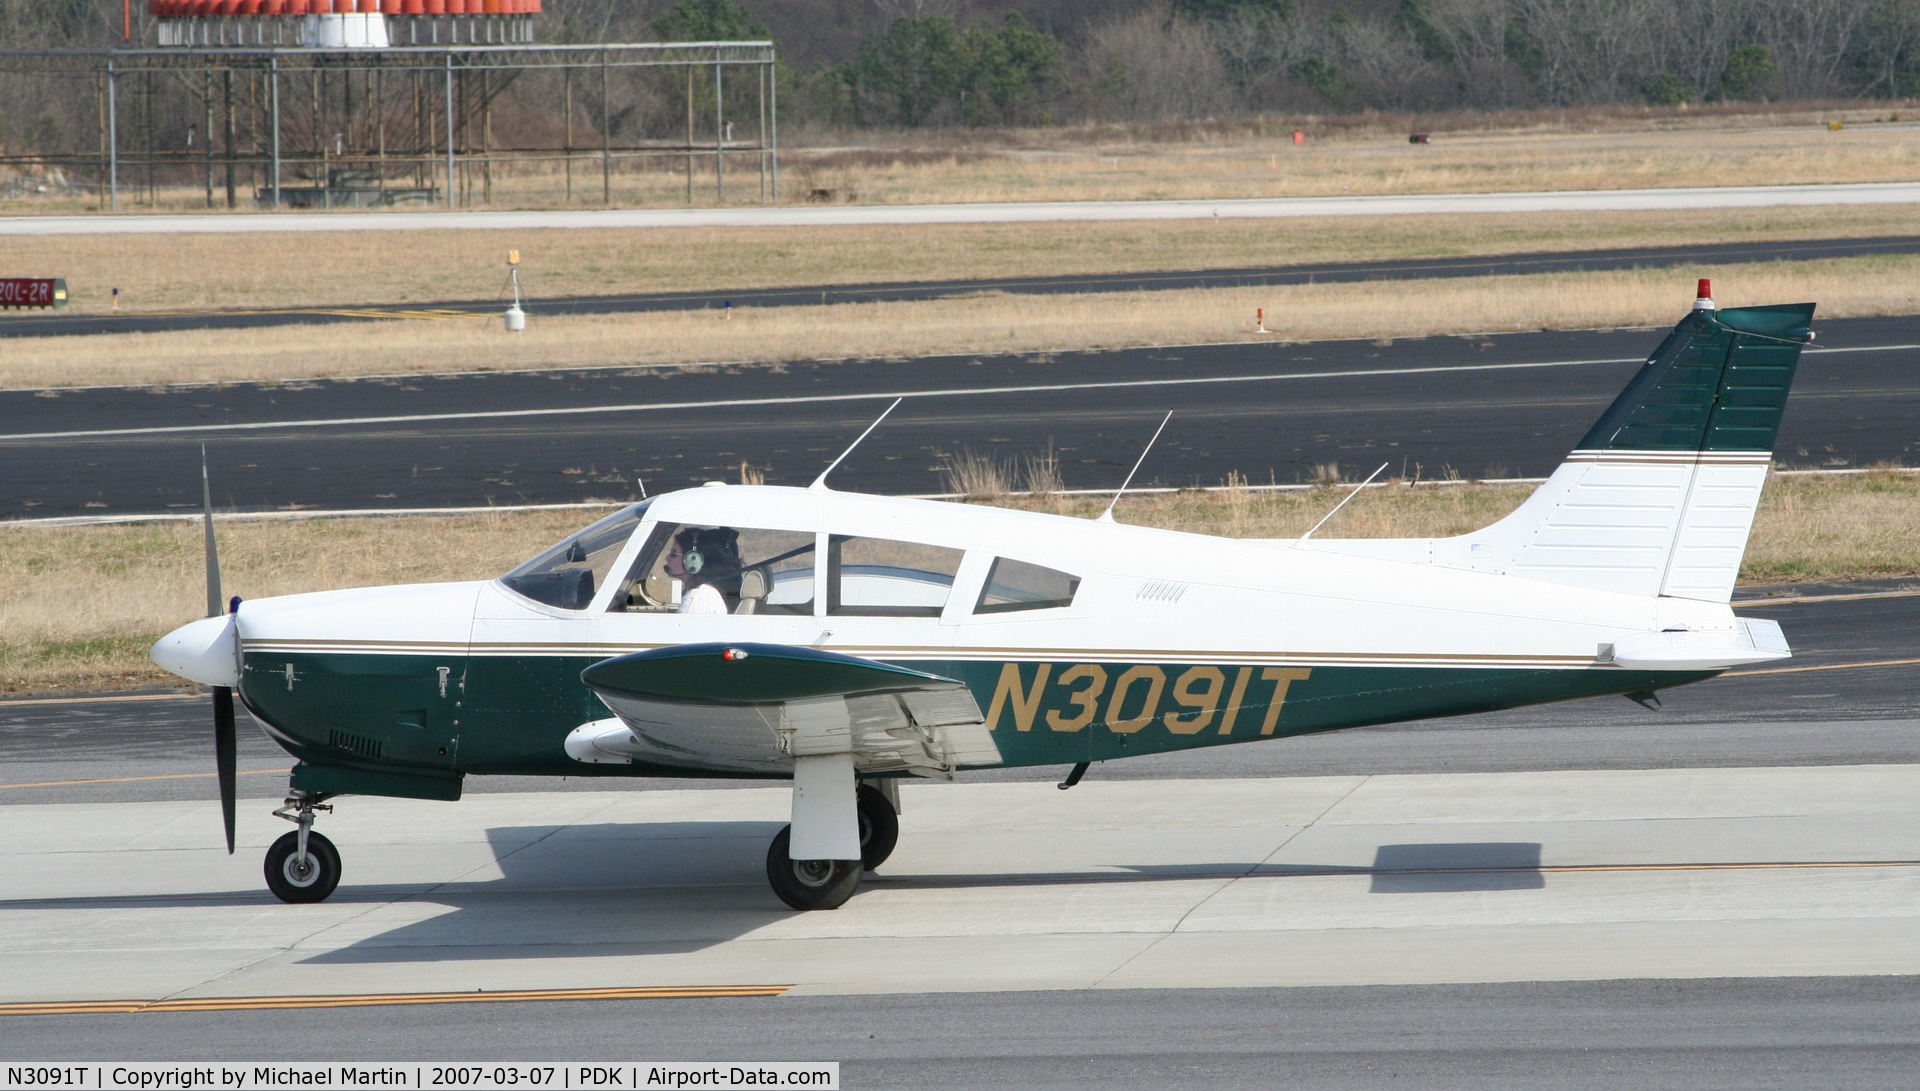 N3091T, 1972 Piper PA-28R-200 C/N 28R-7235312, Taxing back from flight